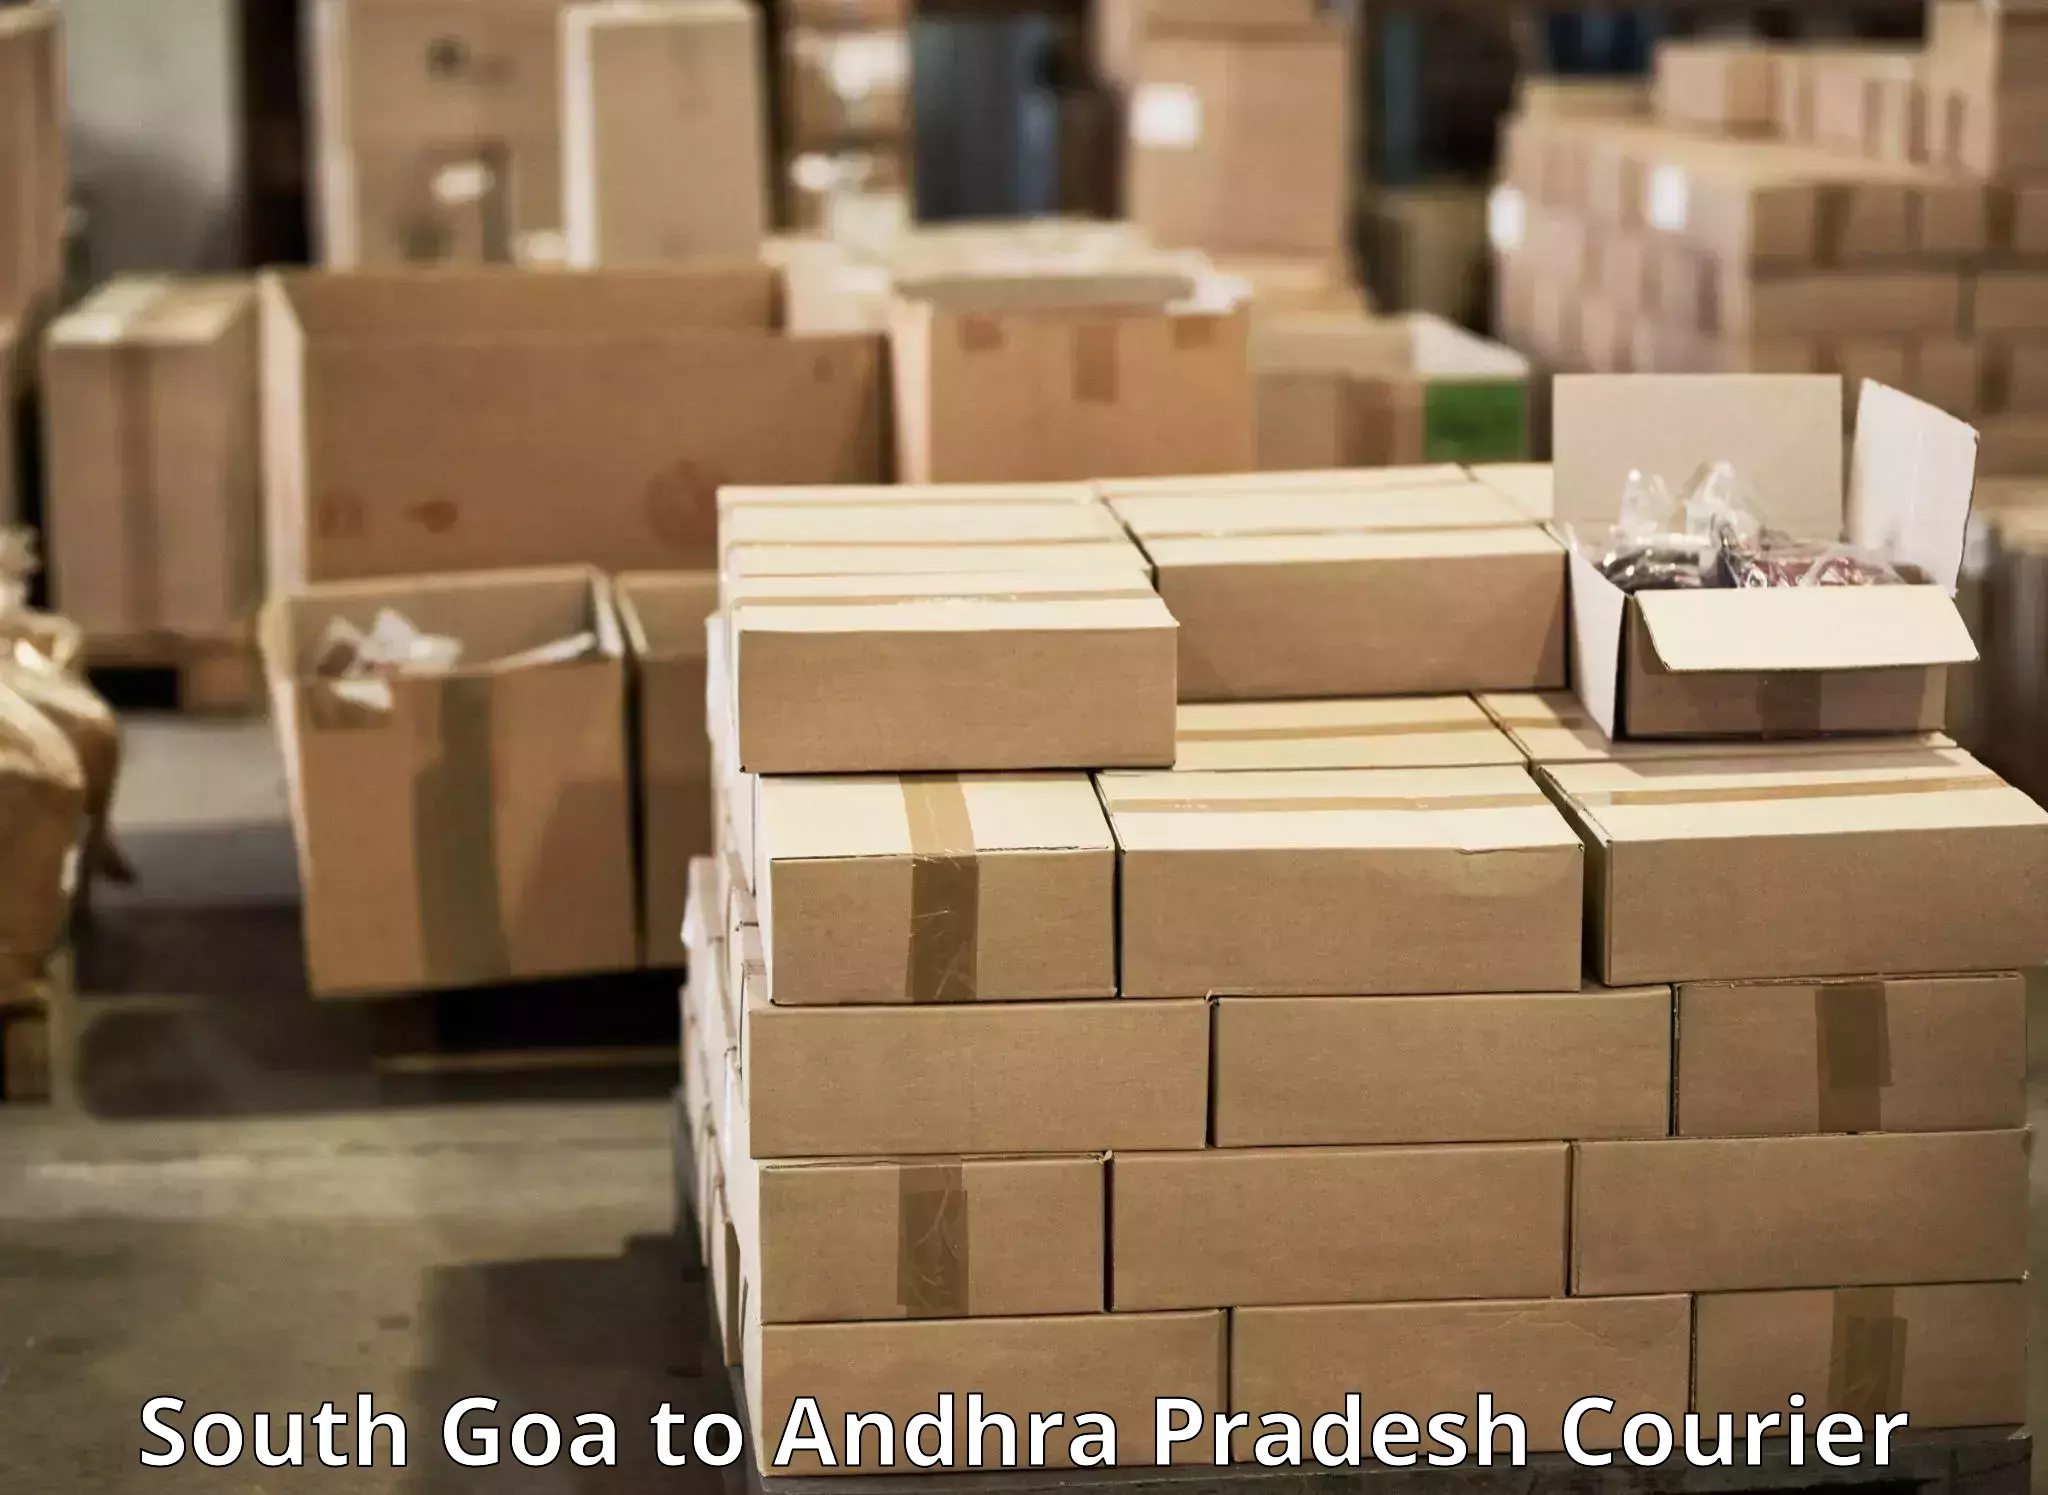 Supply chain efficiency South Goa to Tripuranthakam